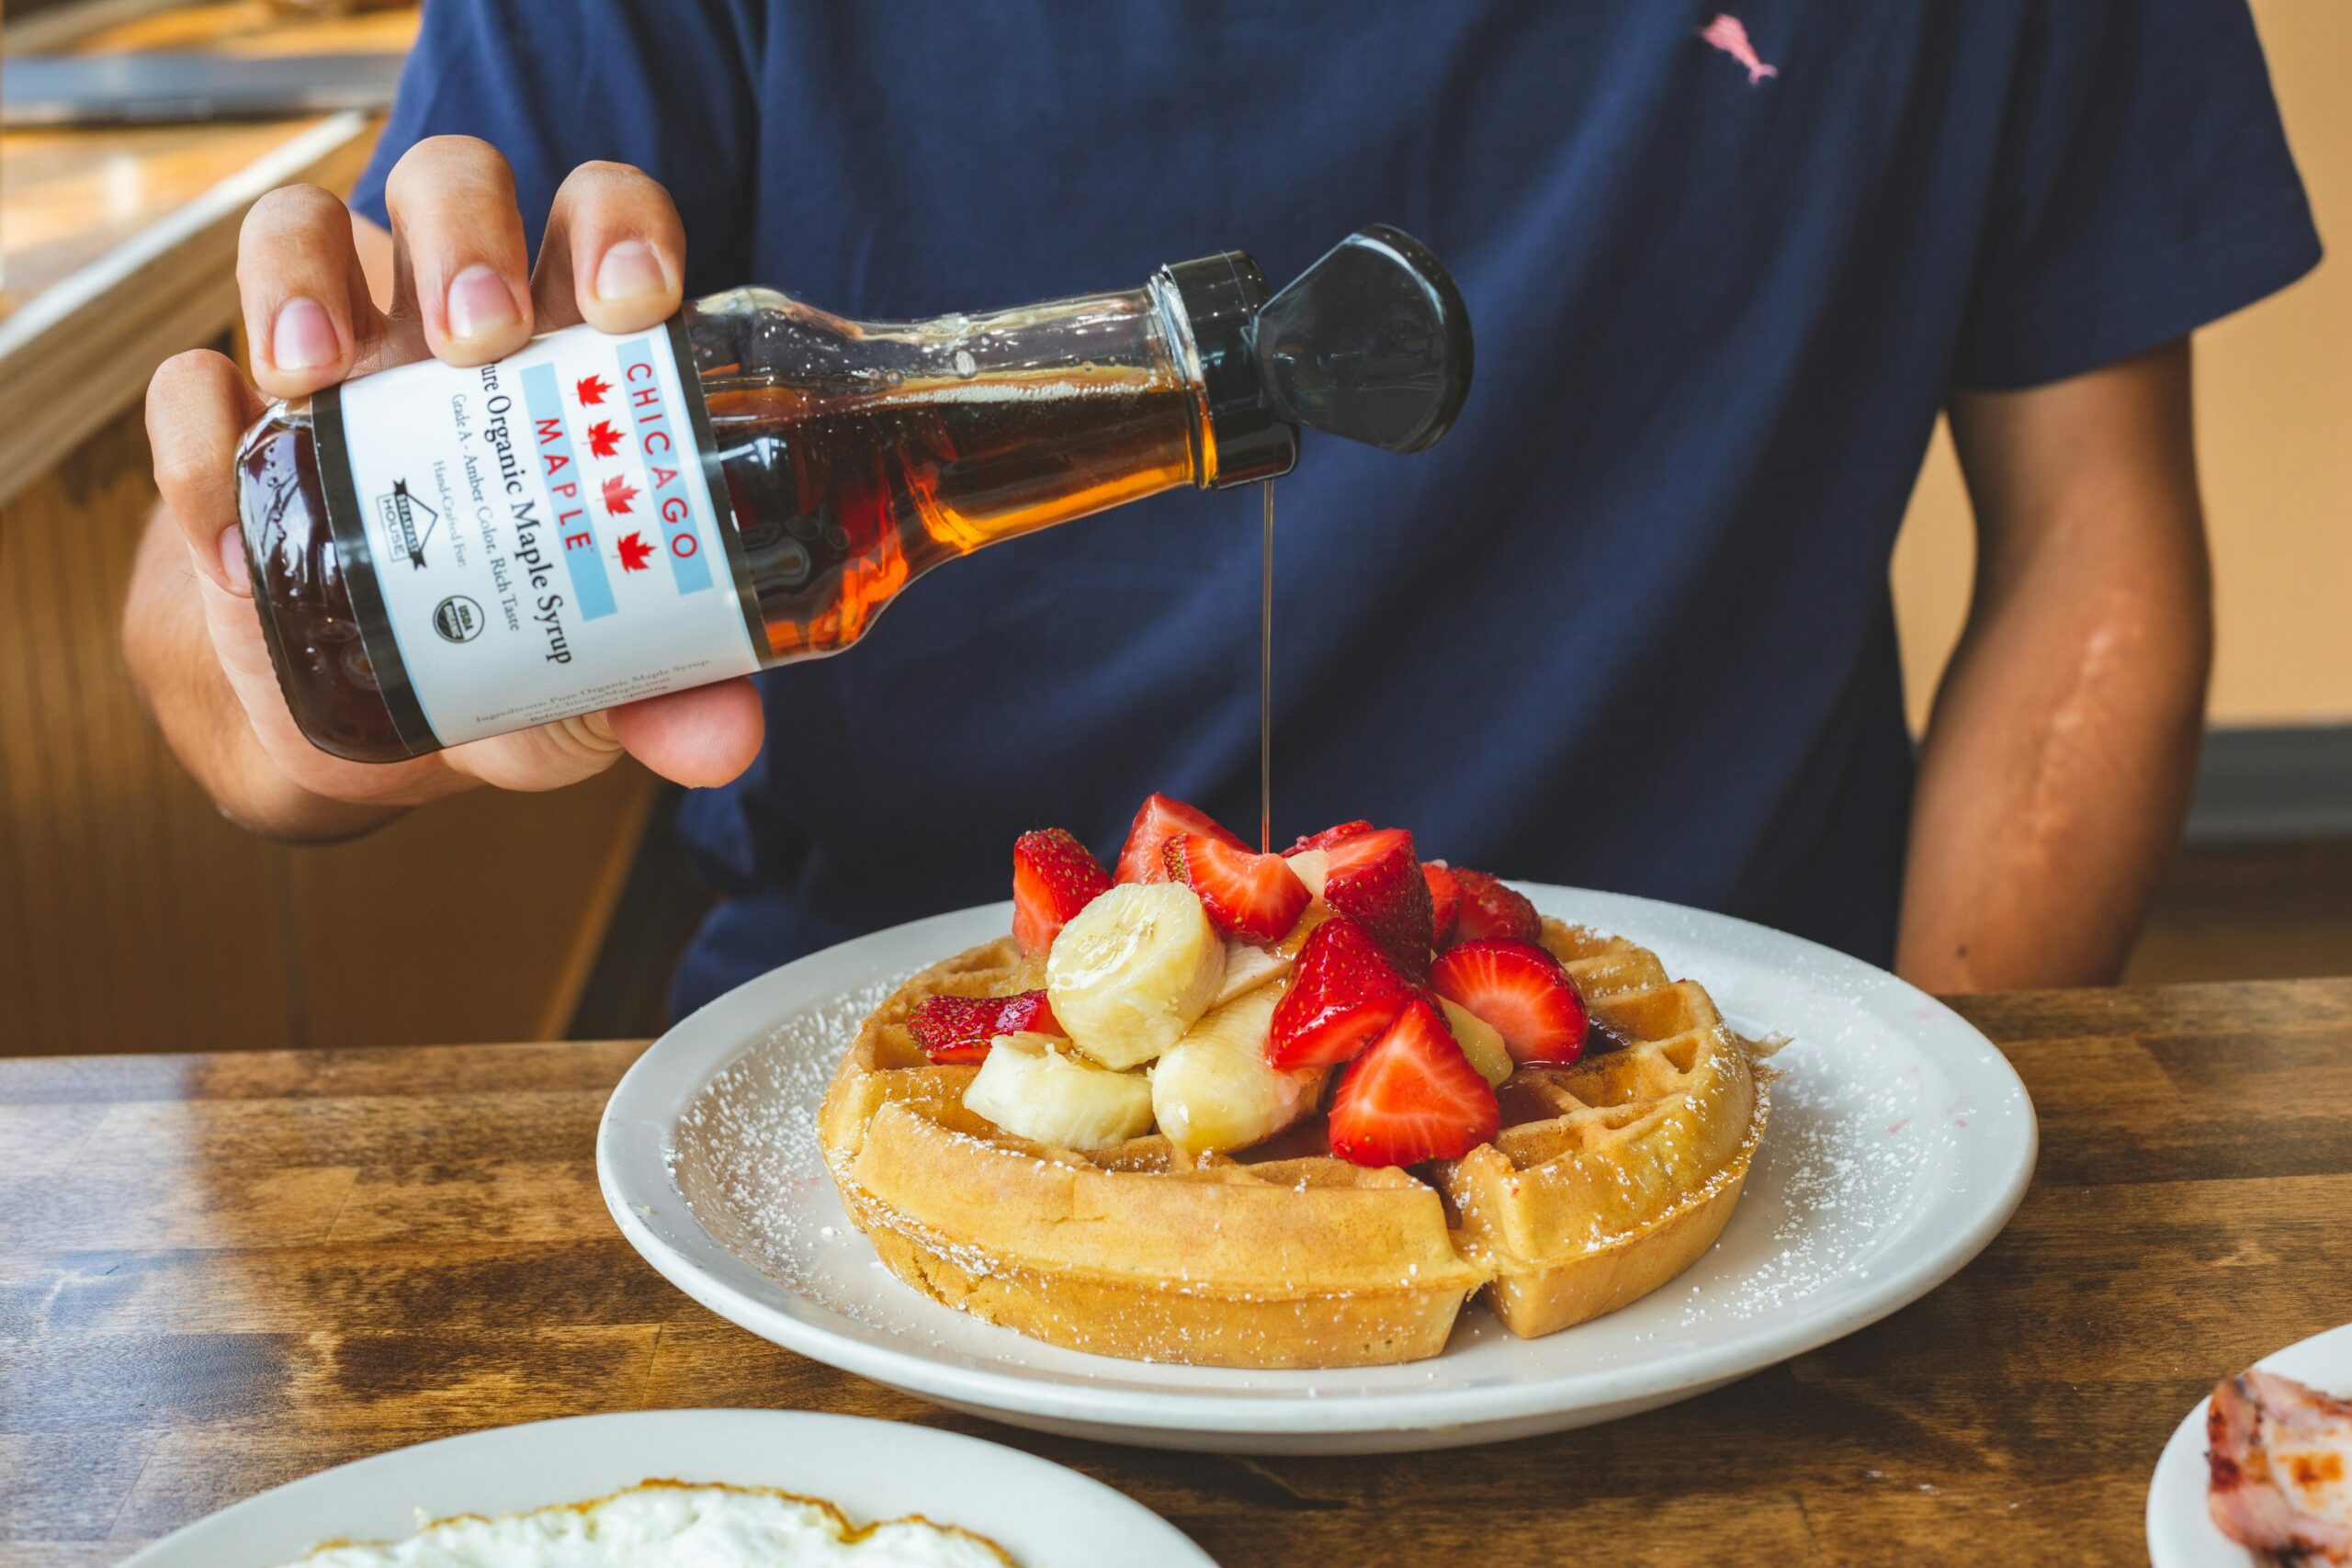 Maple Syrup: What Is, Nutritional Value, Health Benefits, Uses, and More